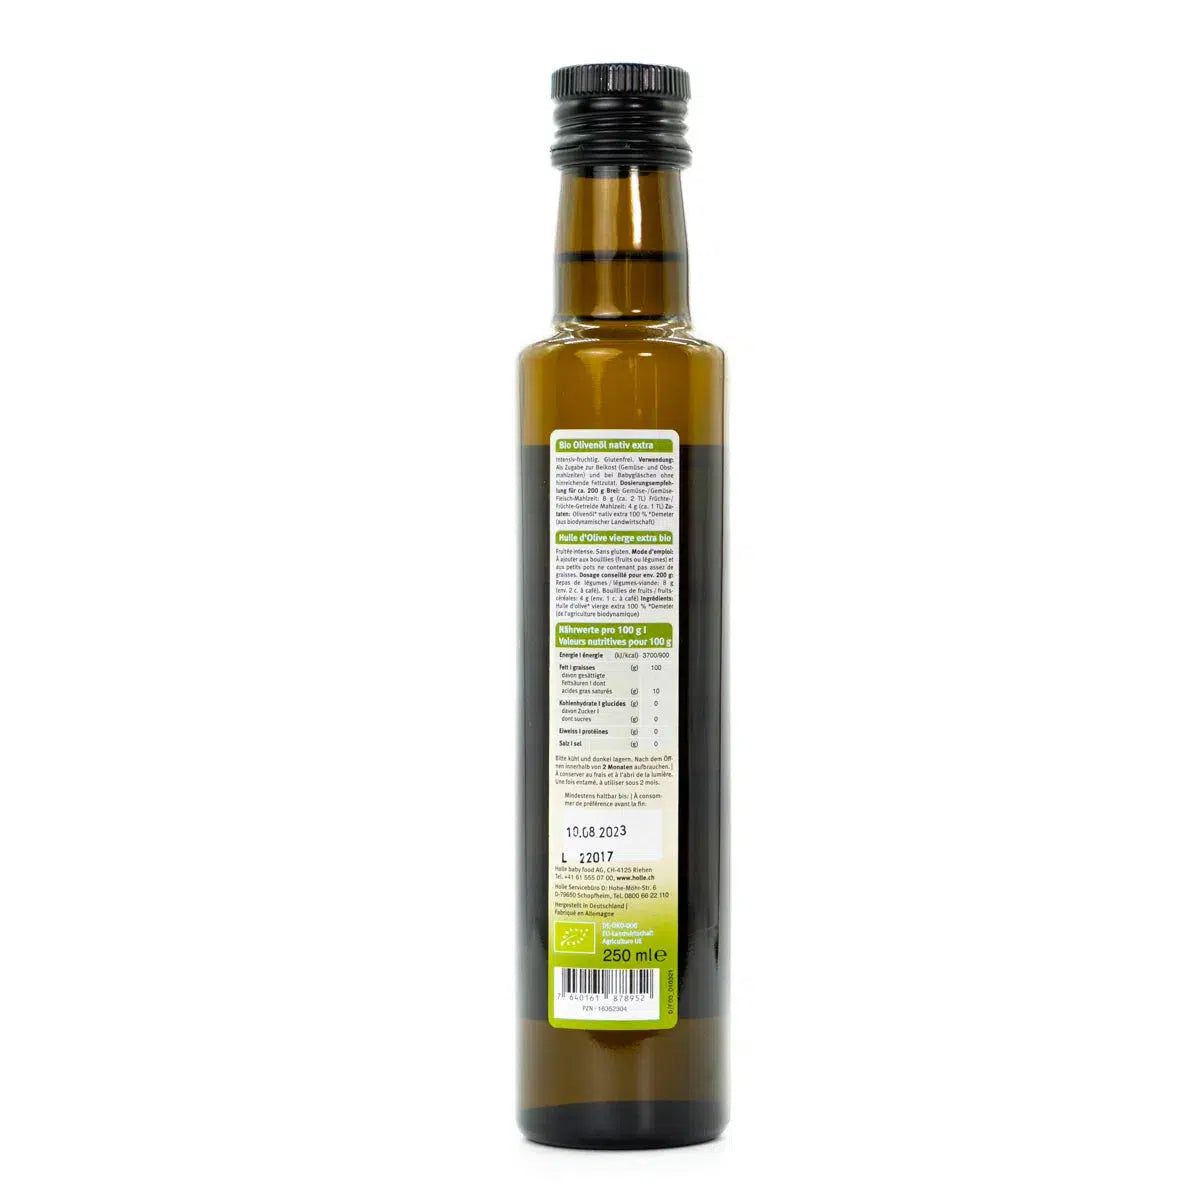 Extra Virgin Olive Oil Organic, Buy Now